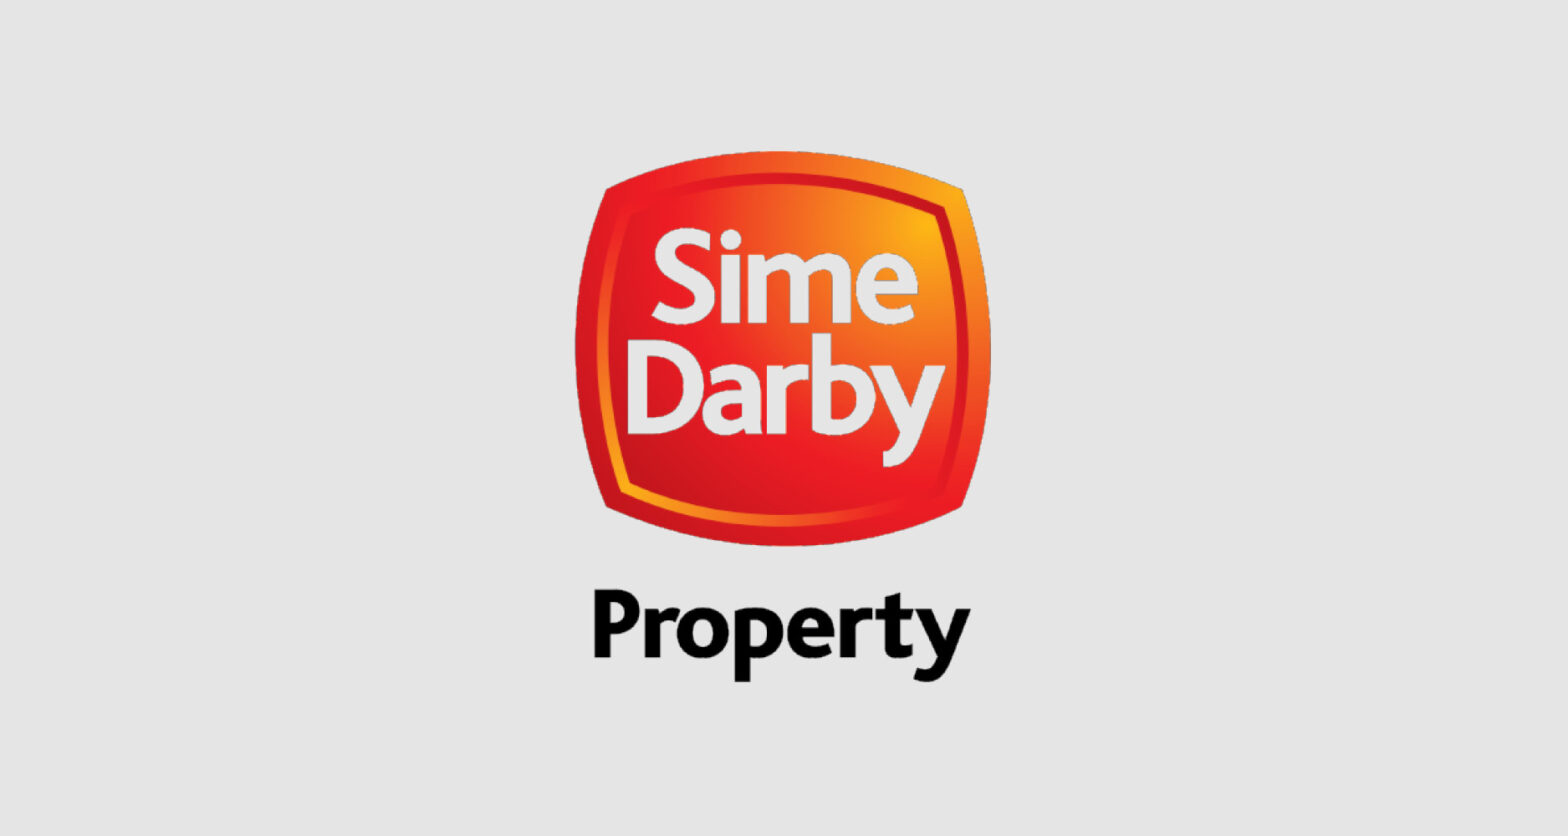 Sime Darby Property provide streamlined support in Malaysia during the COVID-19 pandemic